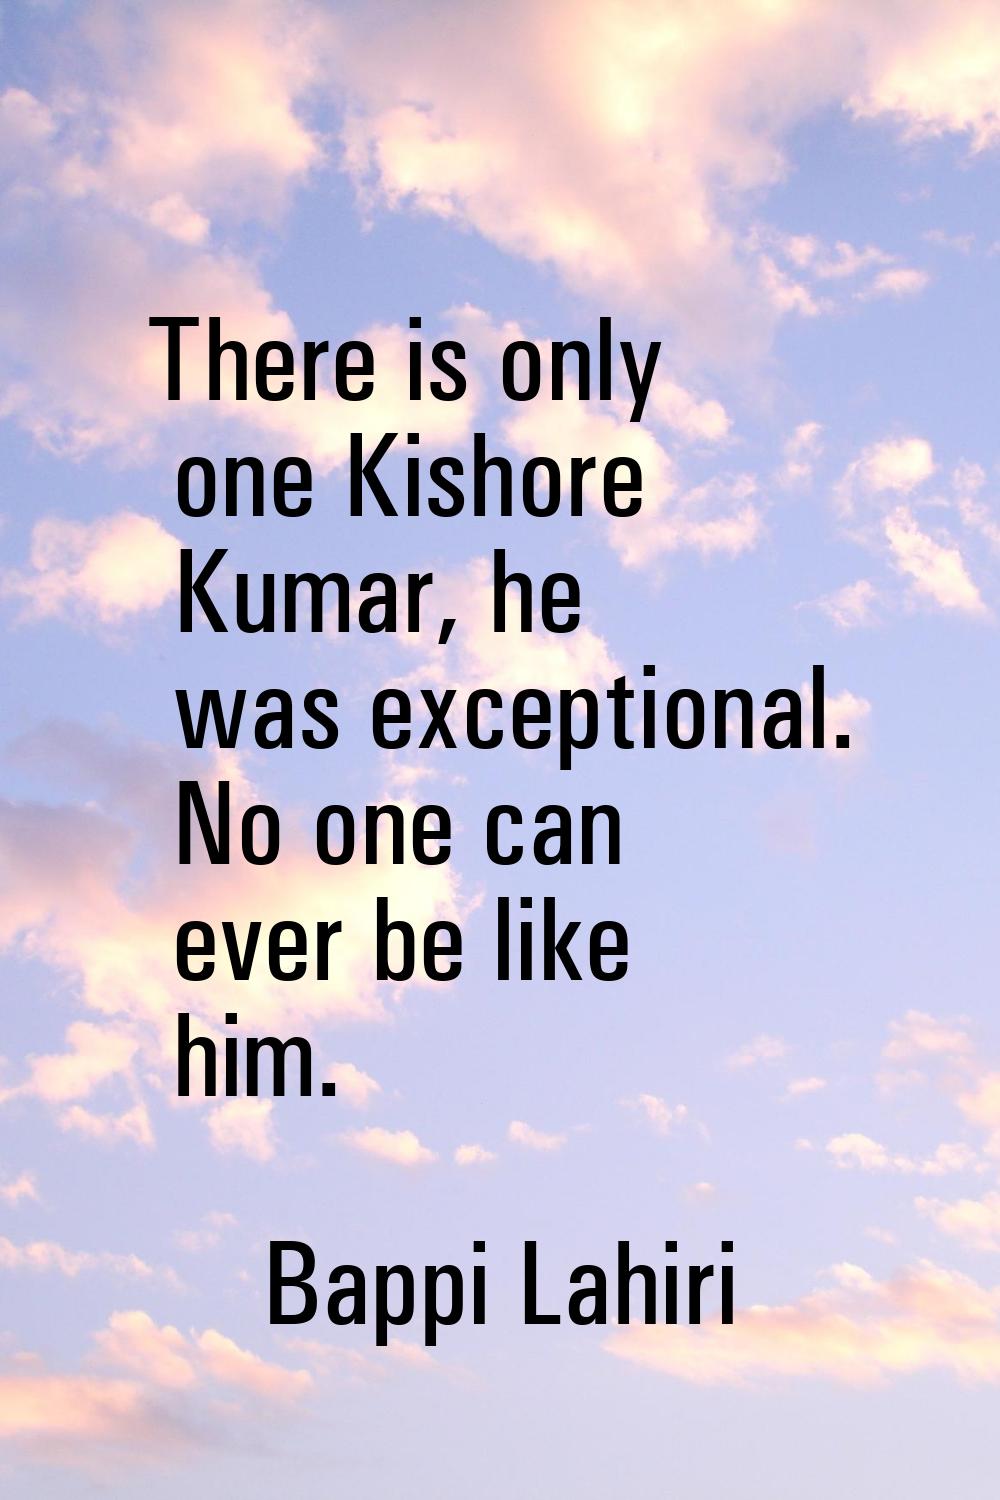 There is only one Kishore Kumar, he was exceptional. No one can ever be like him.